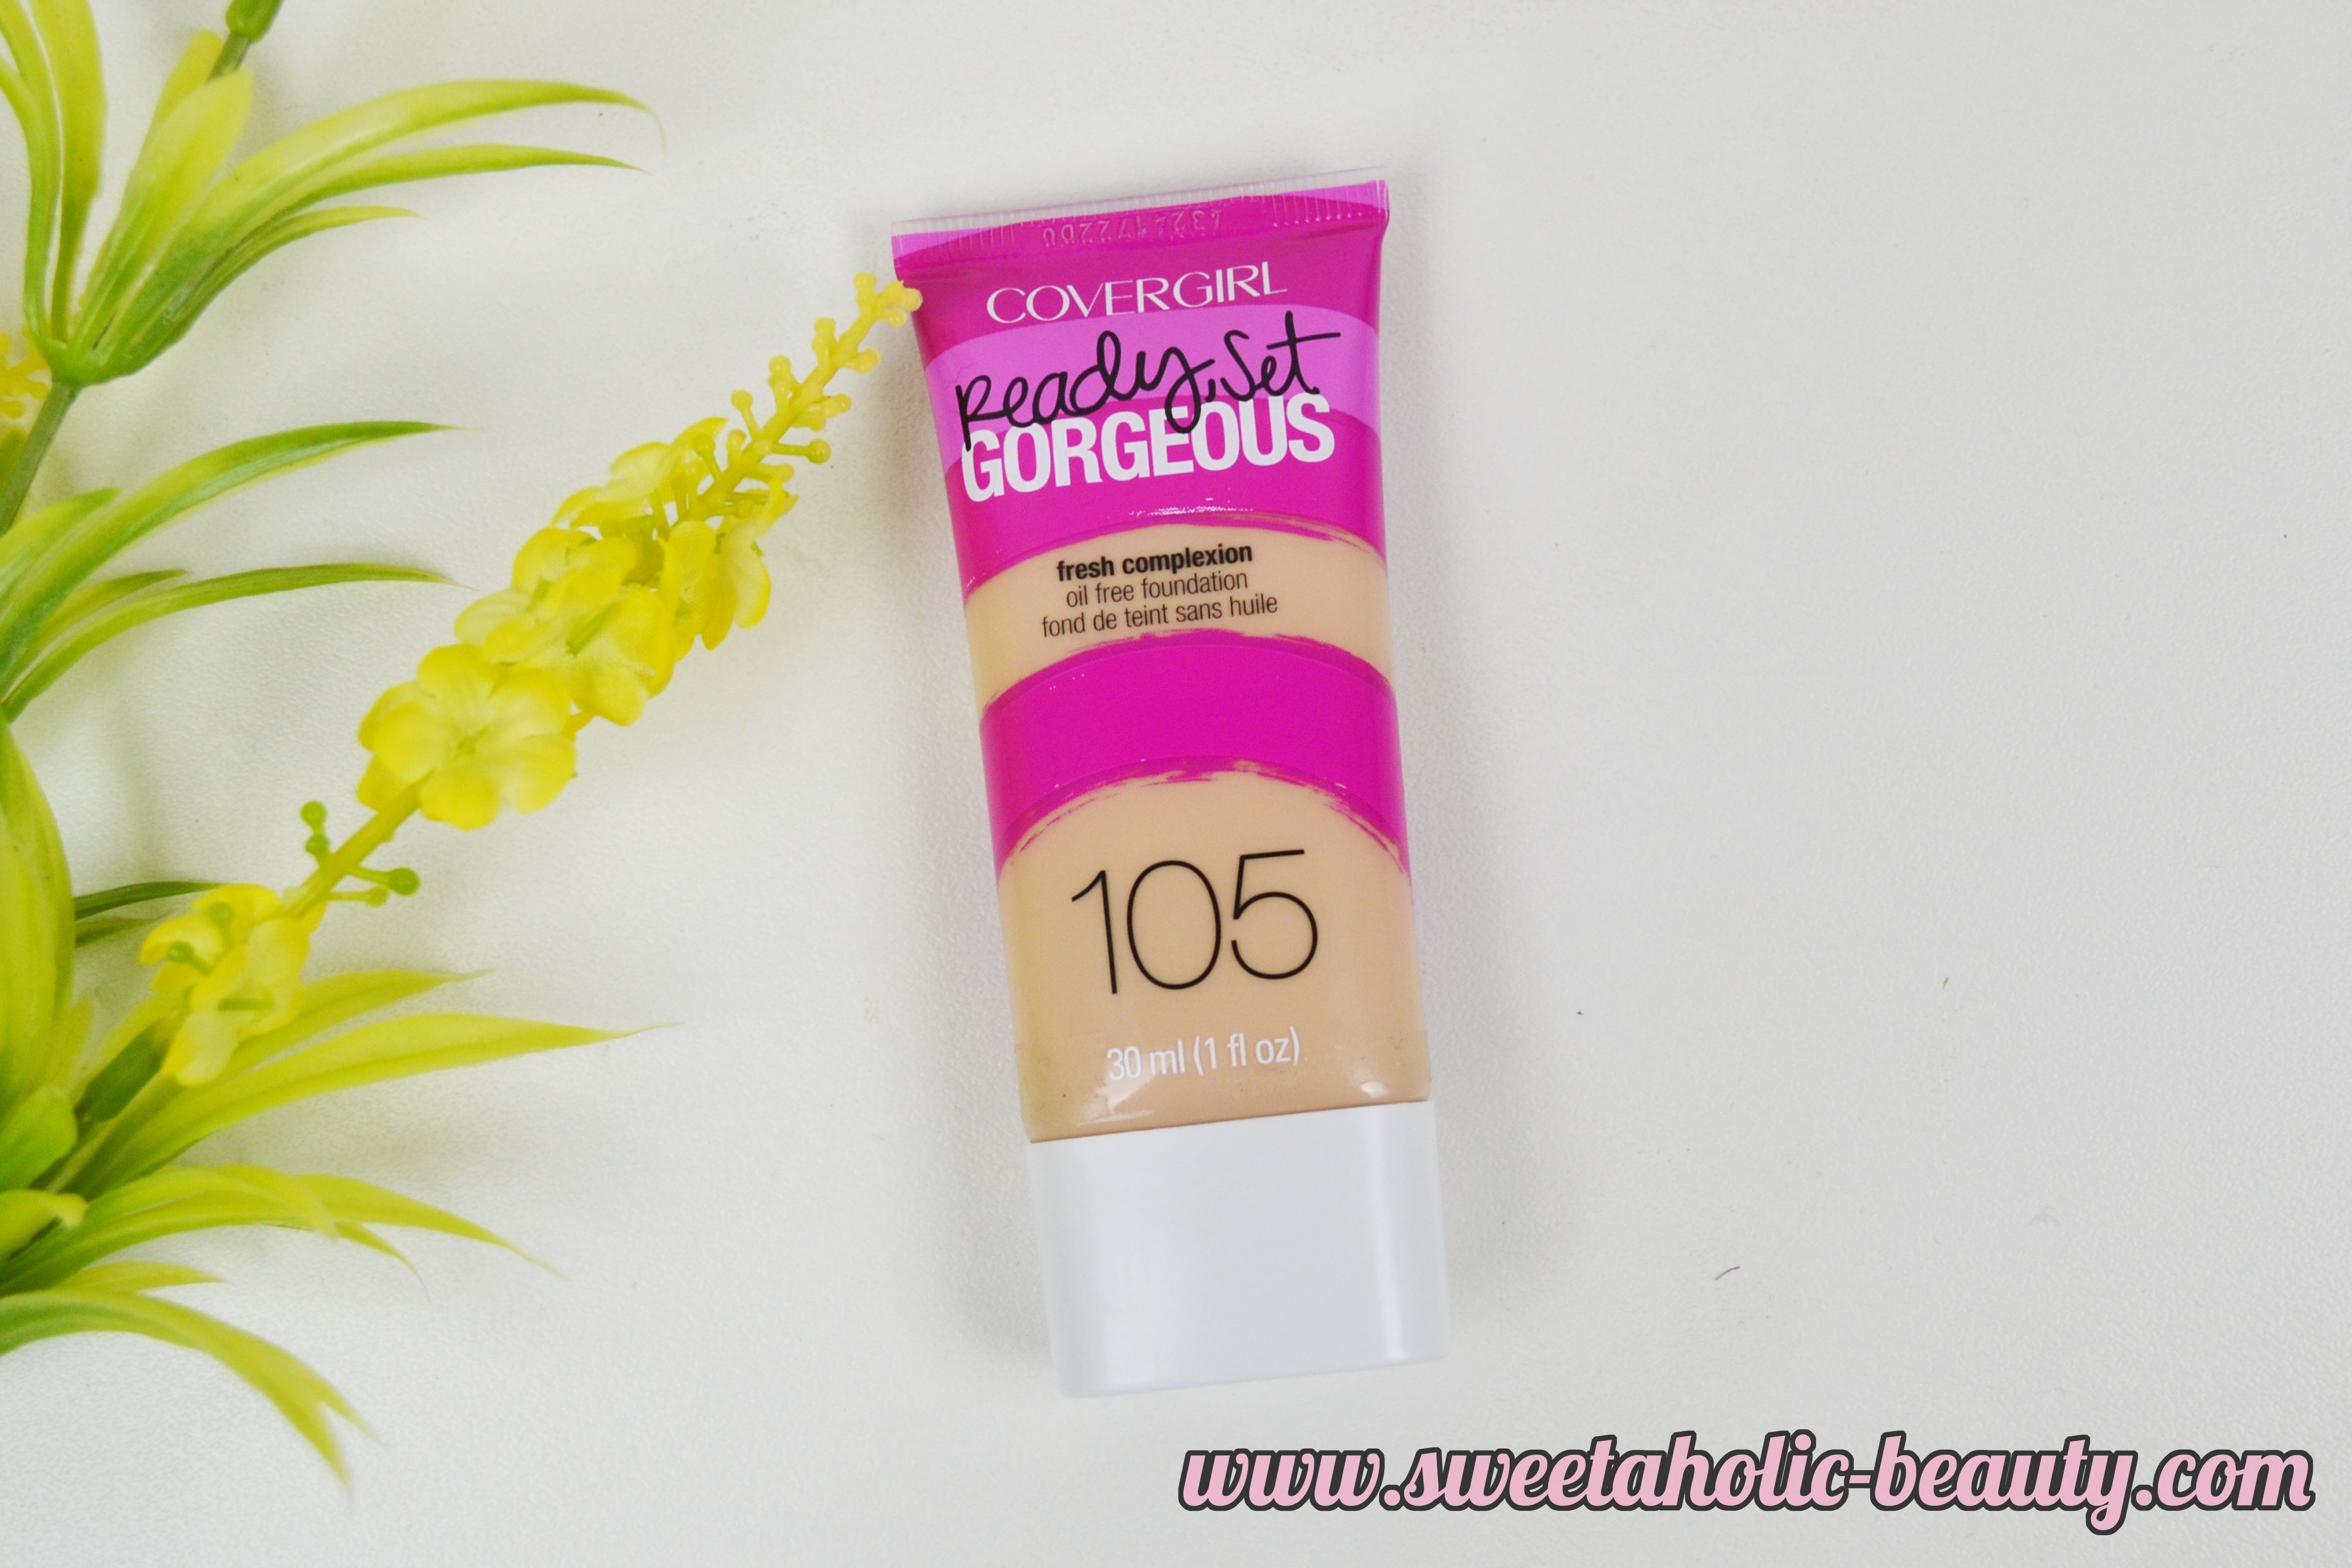 Covergirl Ready Set Gorgeous Foundation Review & Swatches - Sweetaholic Beauty